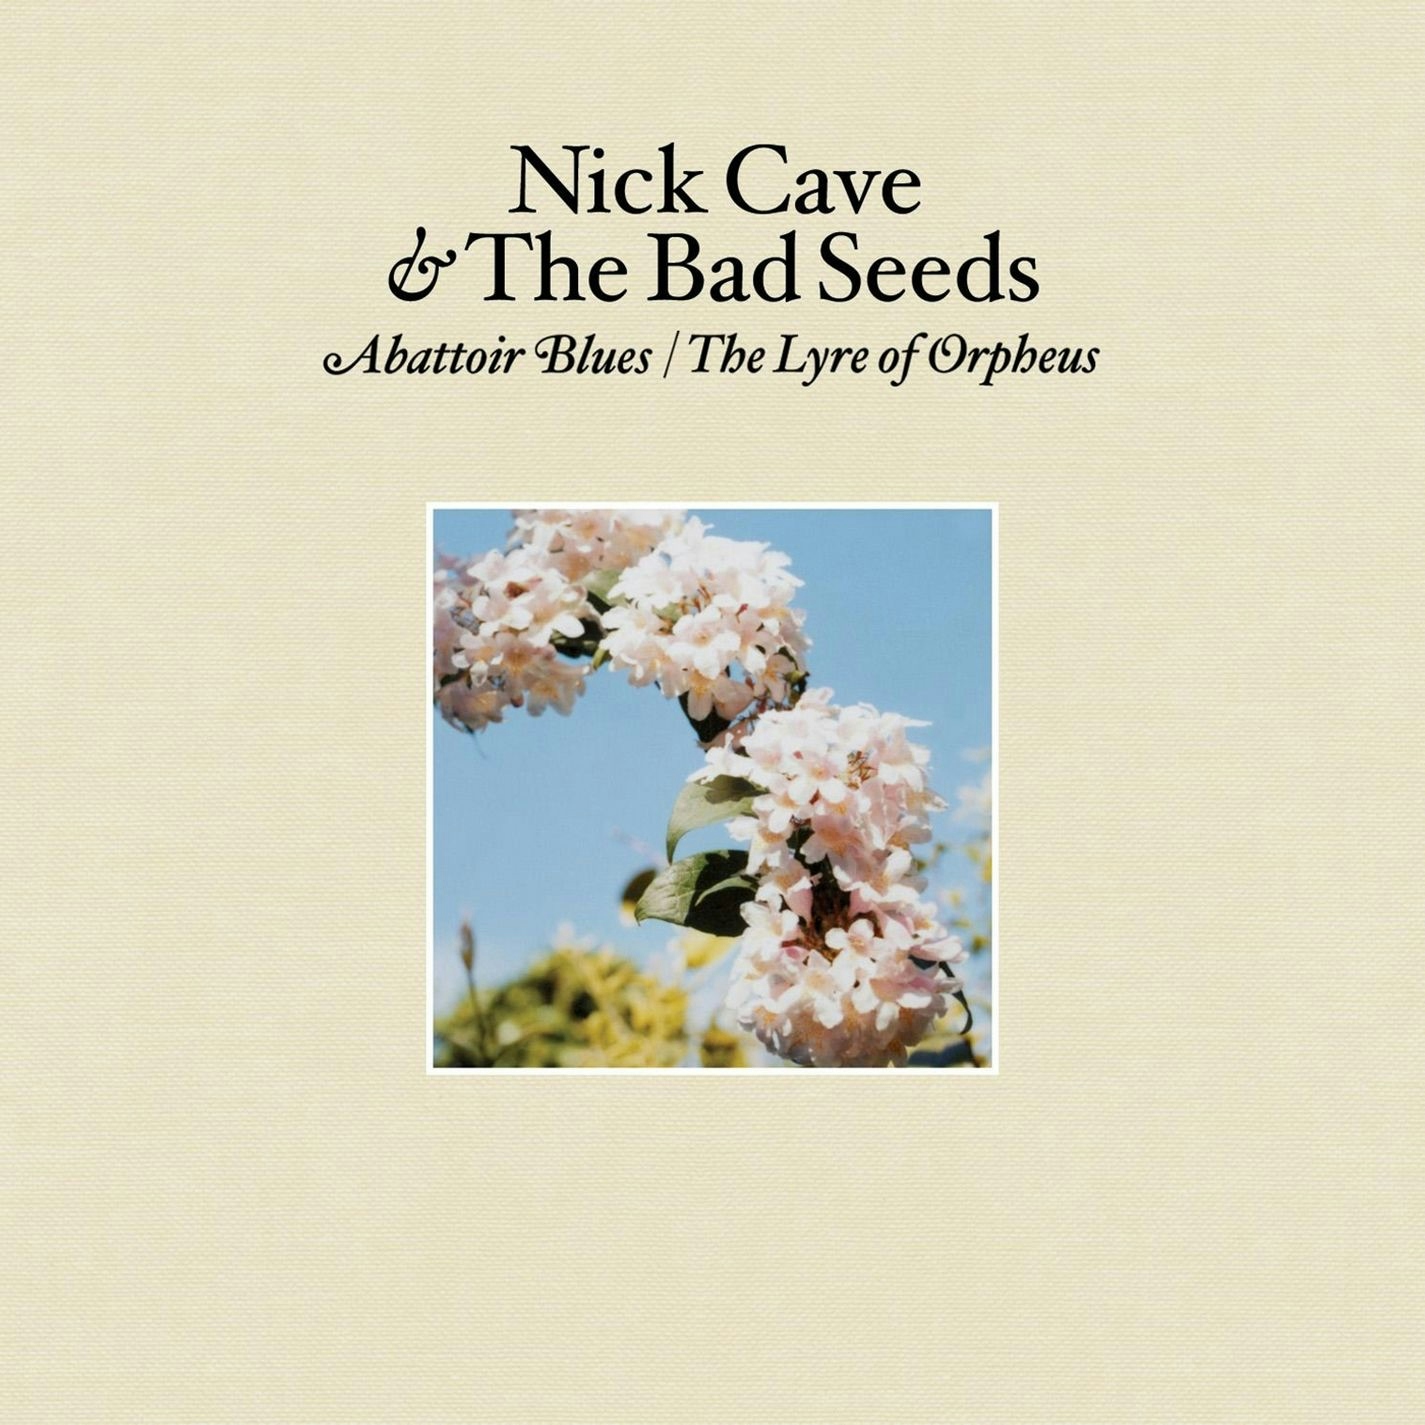 Album artwork for Album artwork for Abattoir Blues / The Lyre Of Orpheus by Nick Cave and The Bad Seeds by Abattoir Blues / The Lyre Of Orpheus - Nick Cave and The Bad Seeds